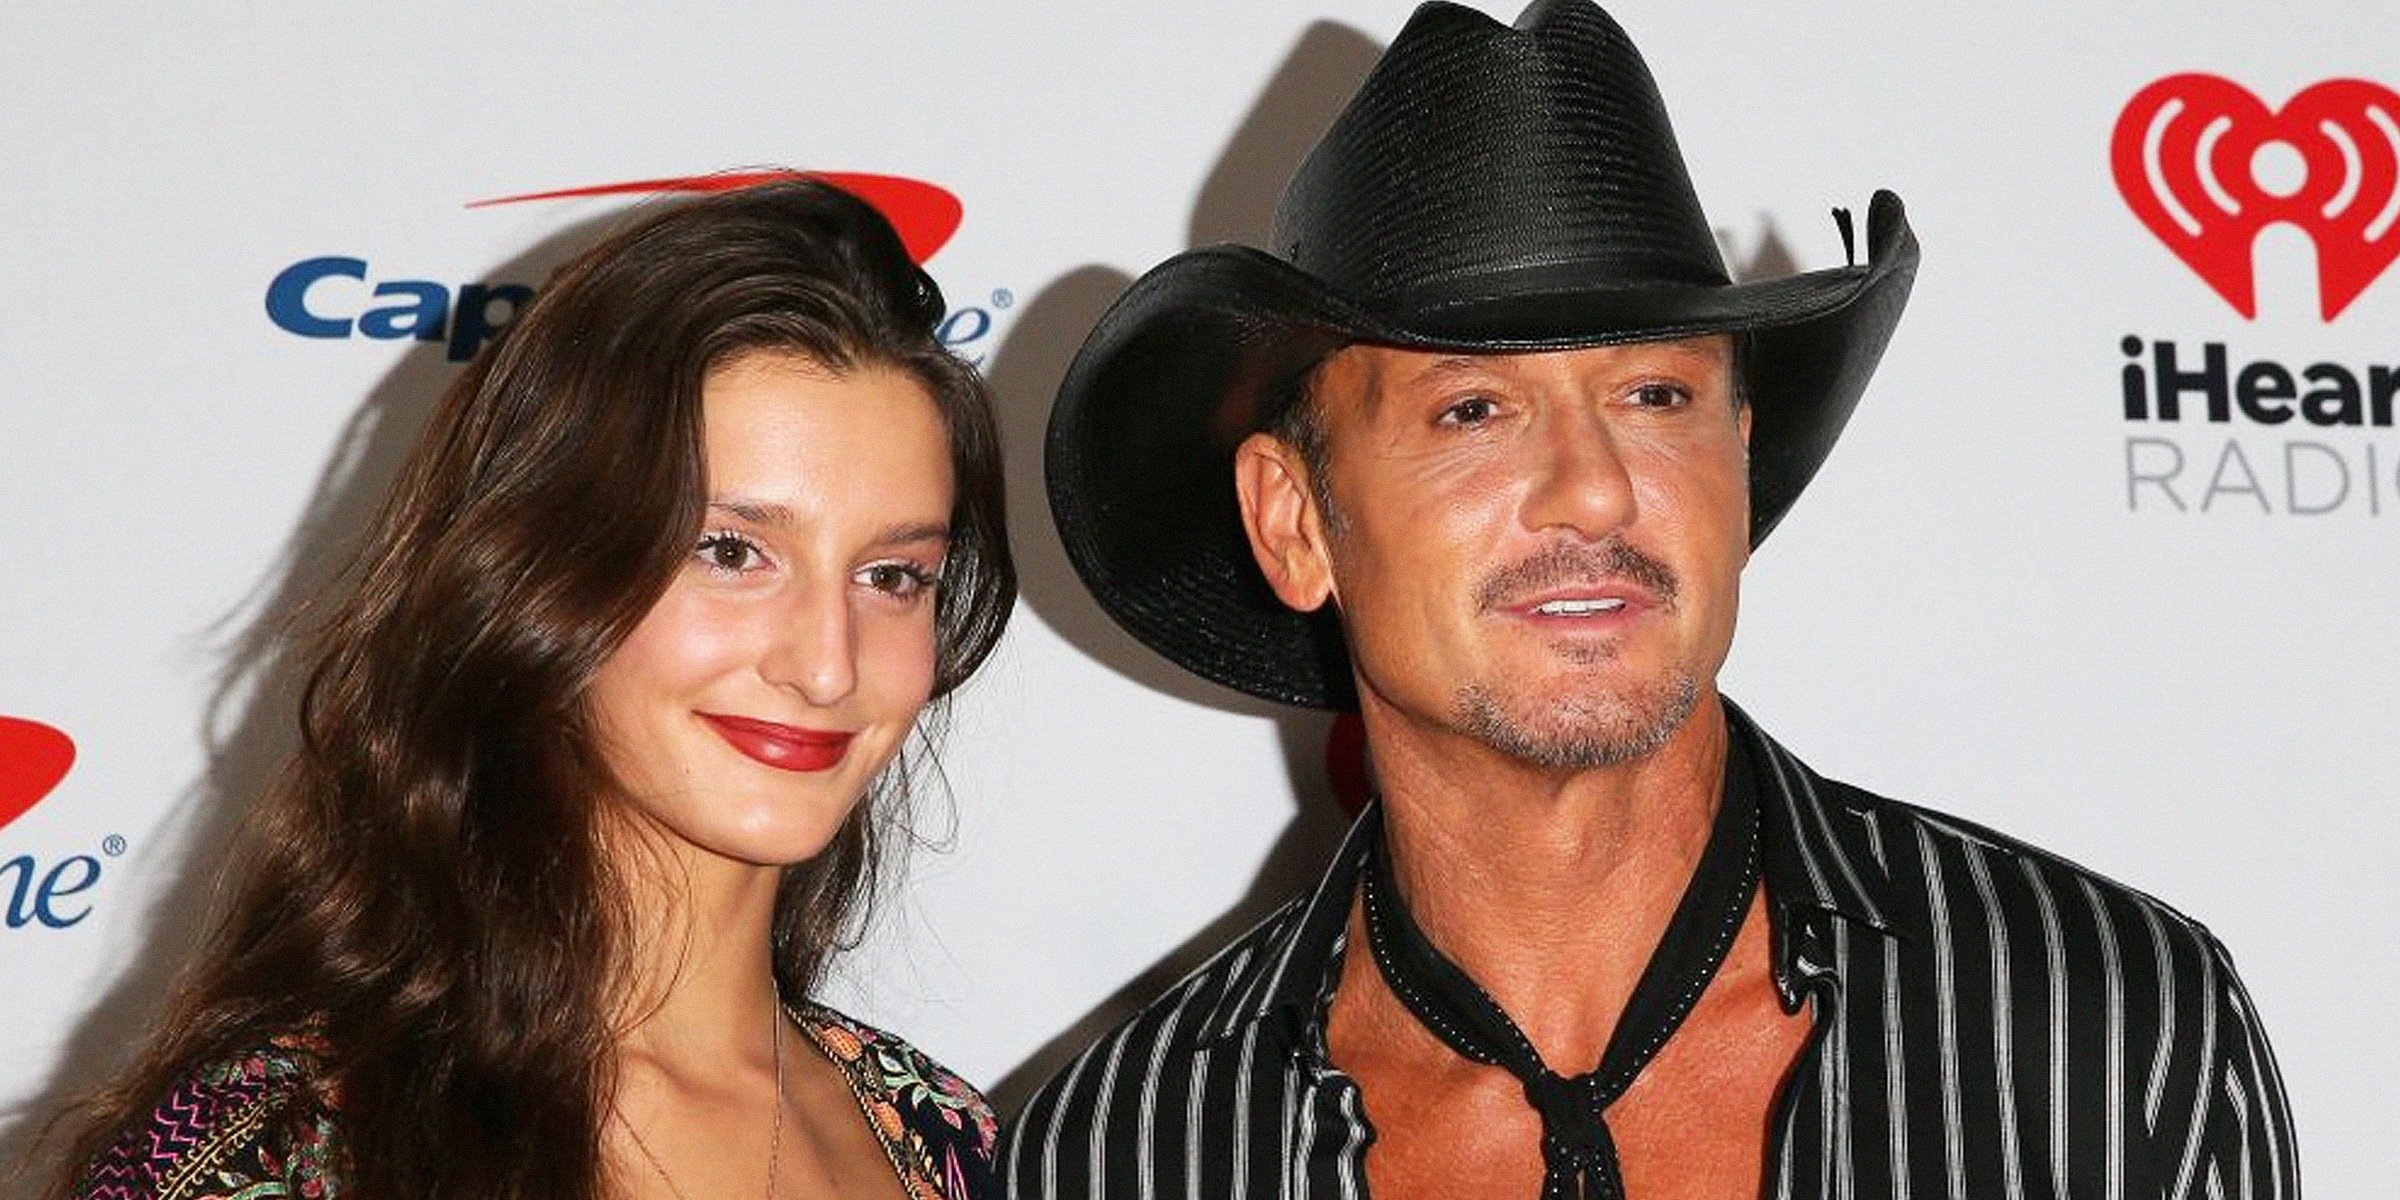 Tim McGraw and his daughter, Audrey. | Source: Getty Images